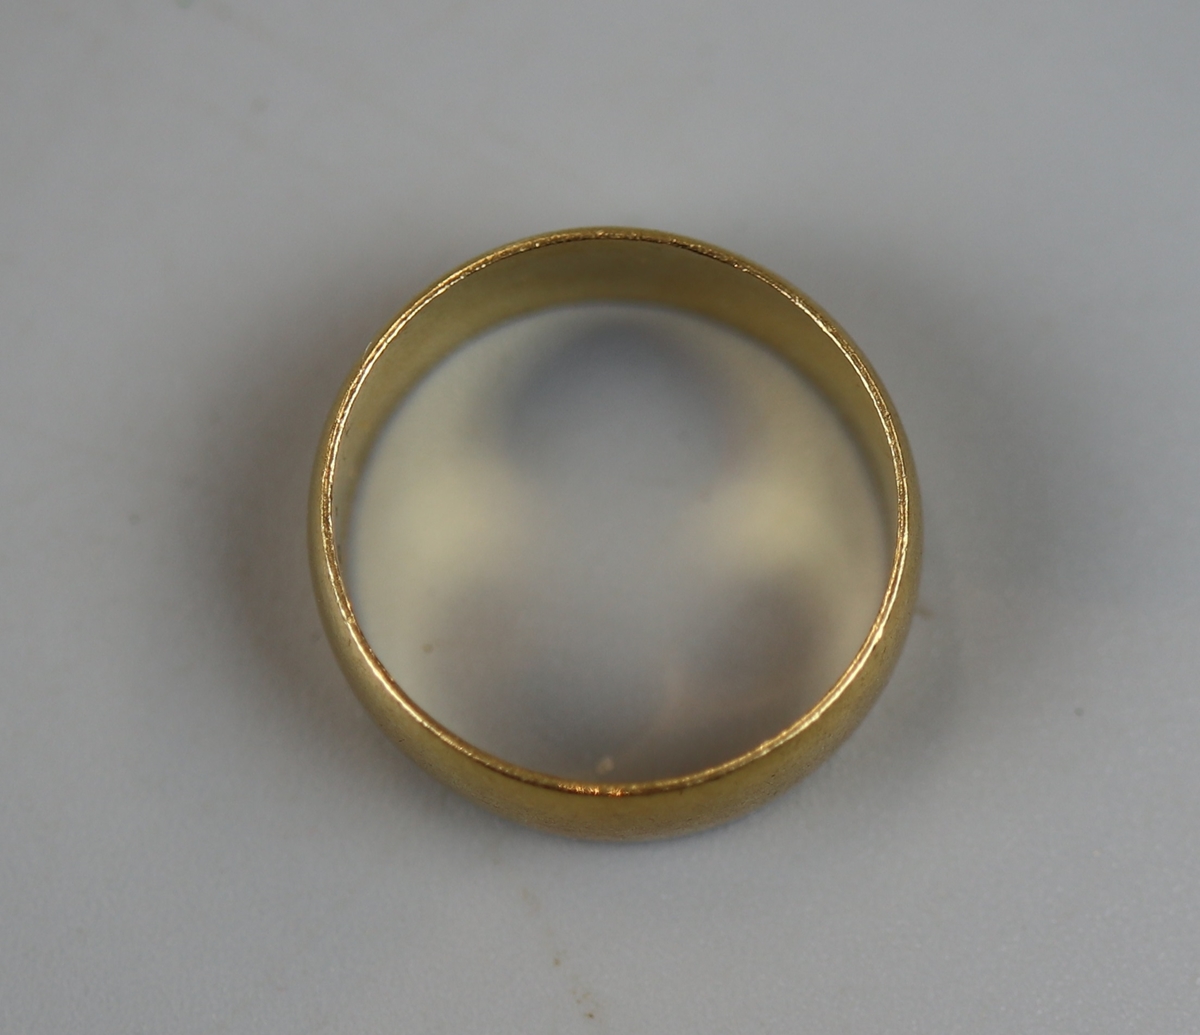 22ct gold wedding band (size L¾) - Approx 5g - Image 2 of 2